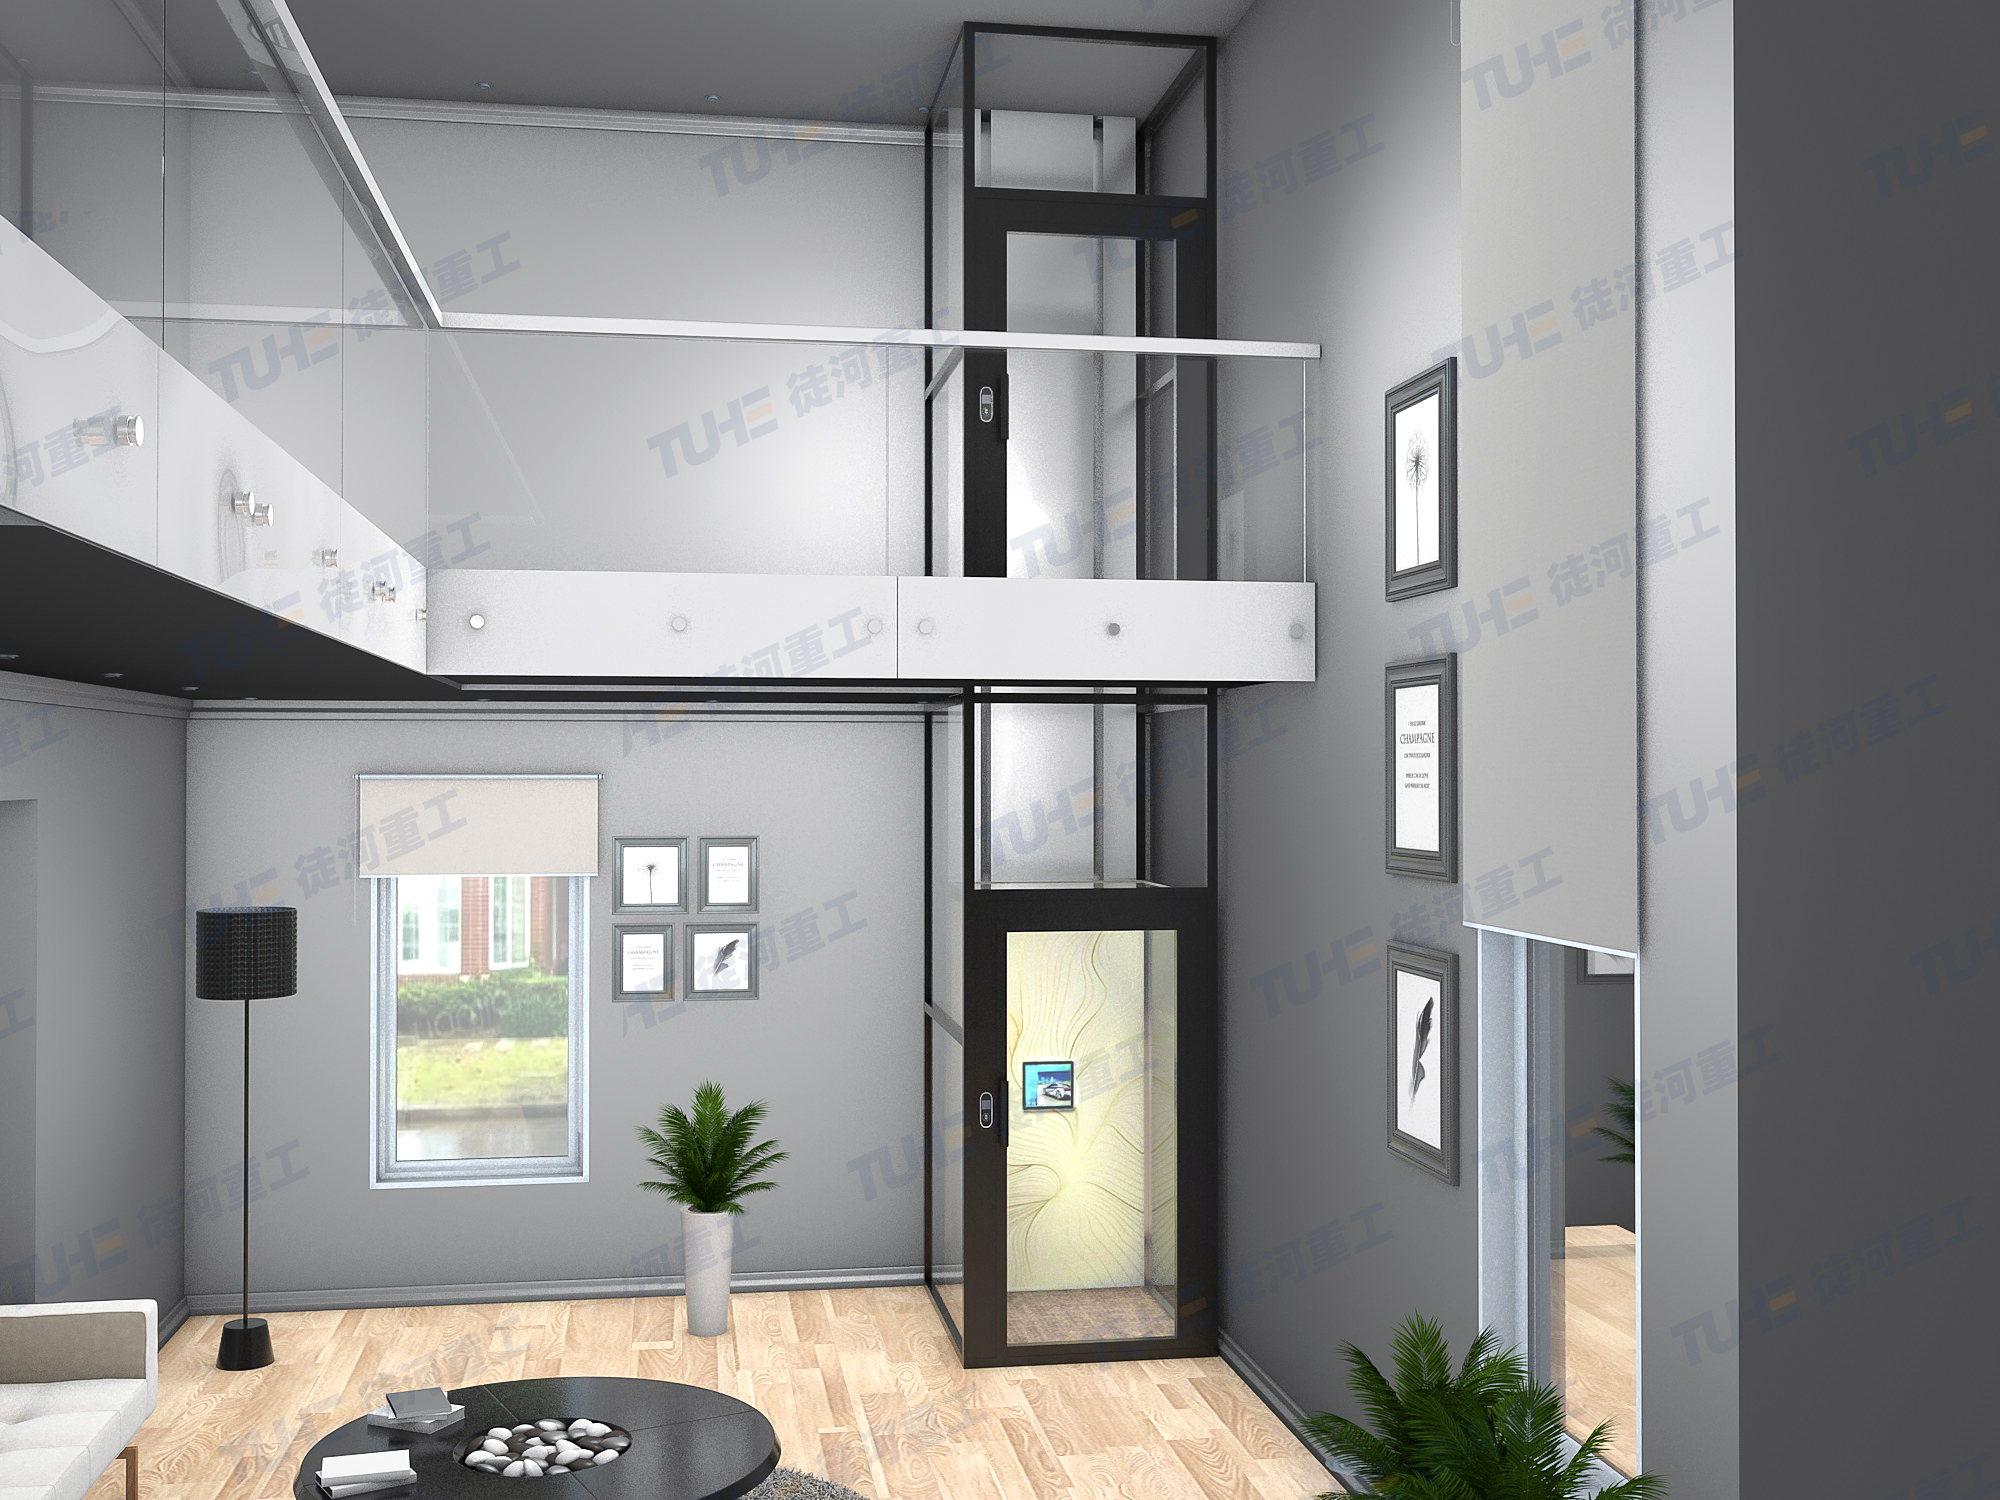 Small elevators for homes